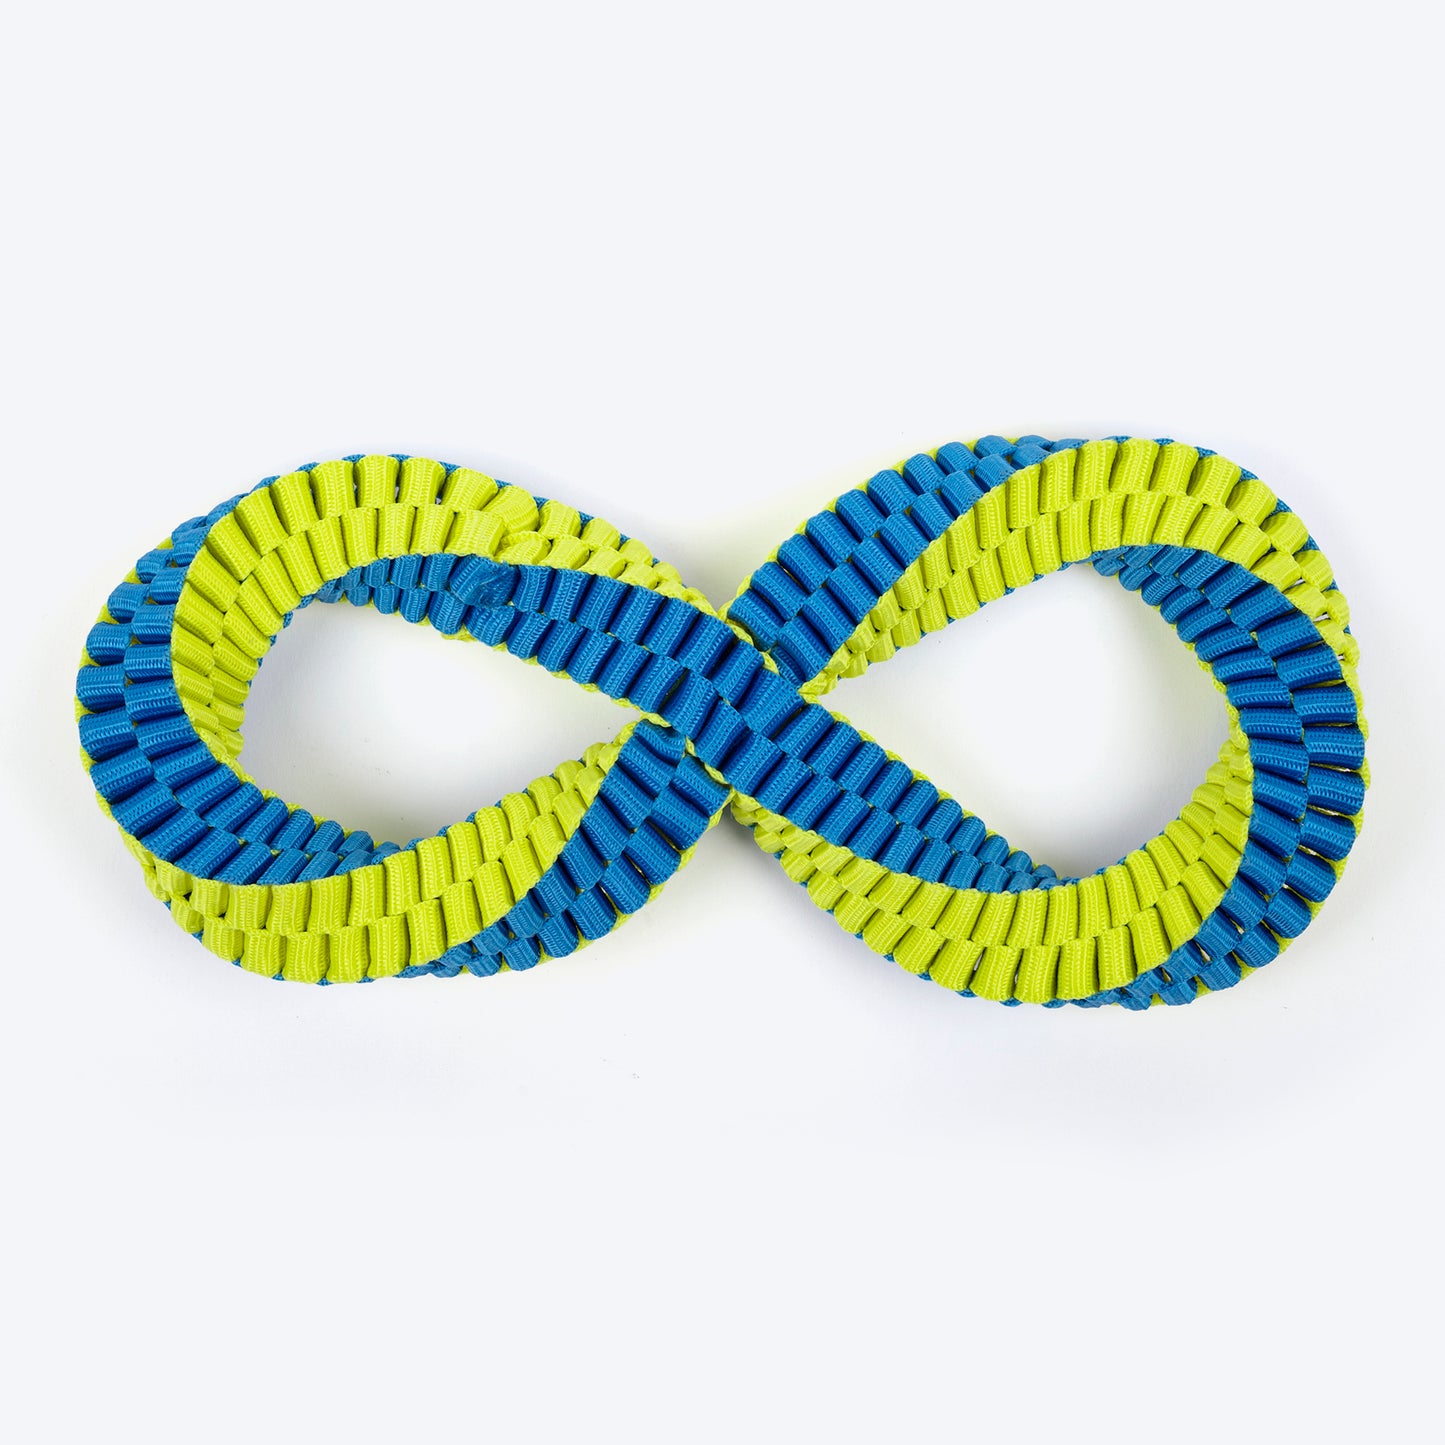 HUFT Basics Swirly Strong Infinity Toy for Dogs_01